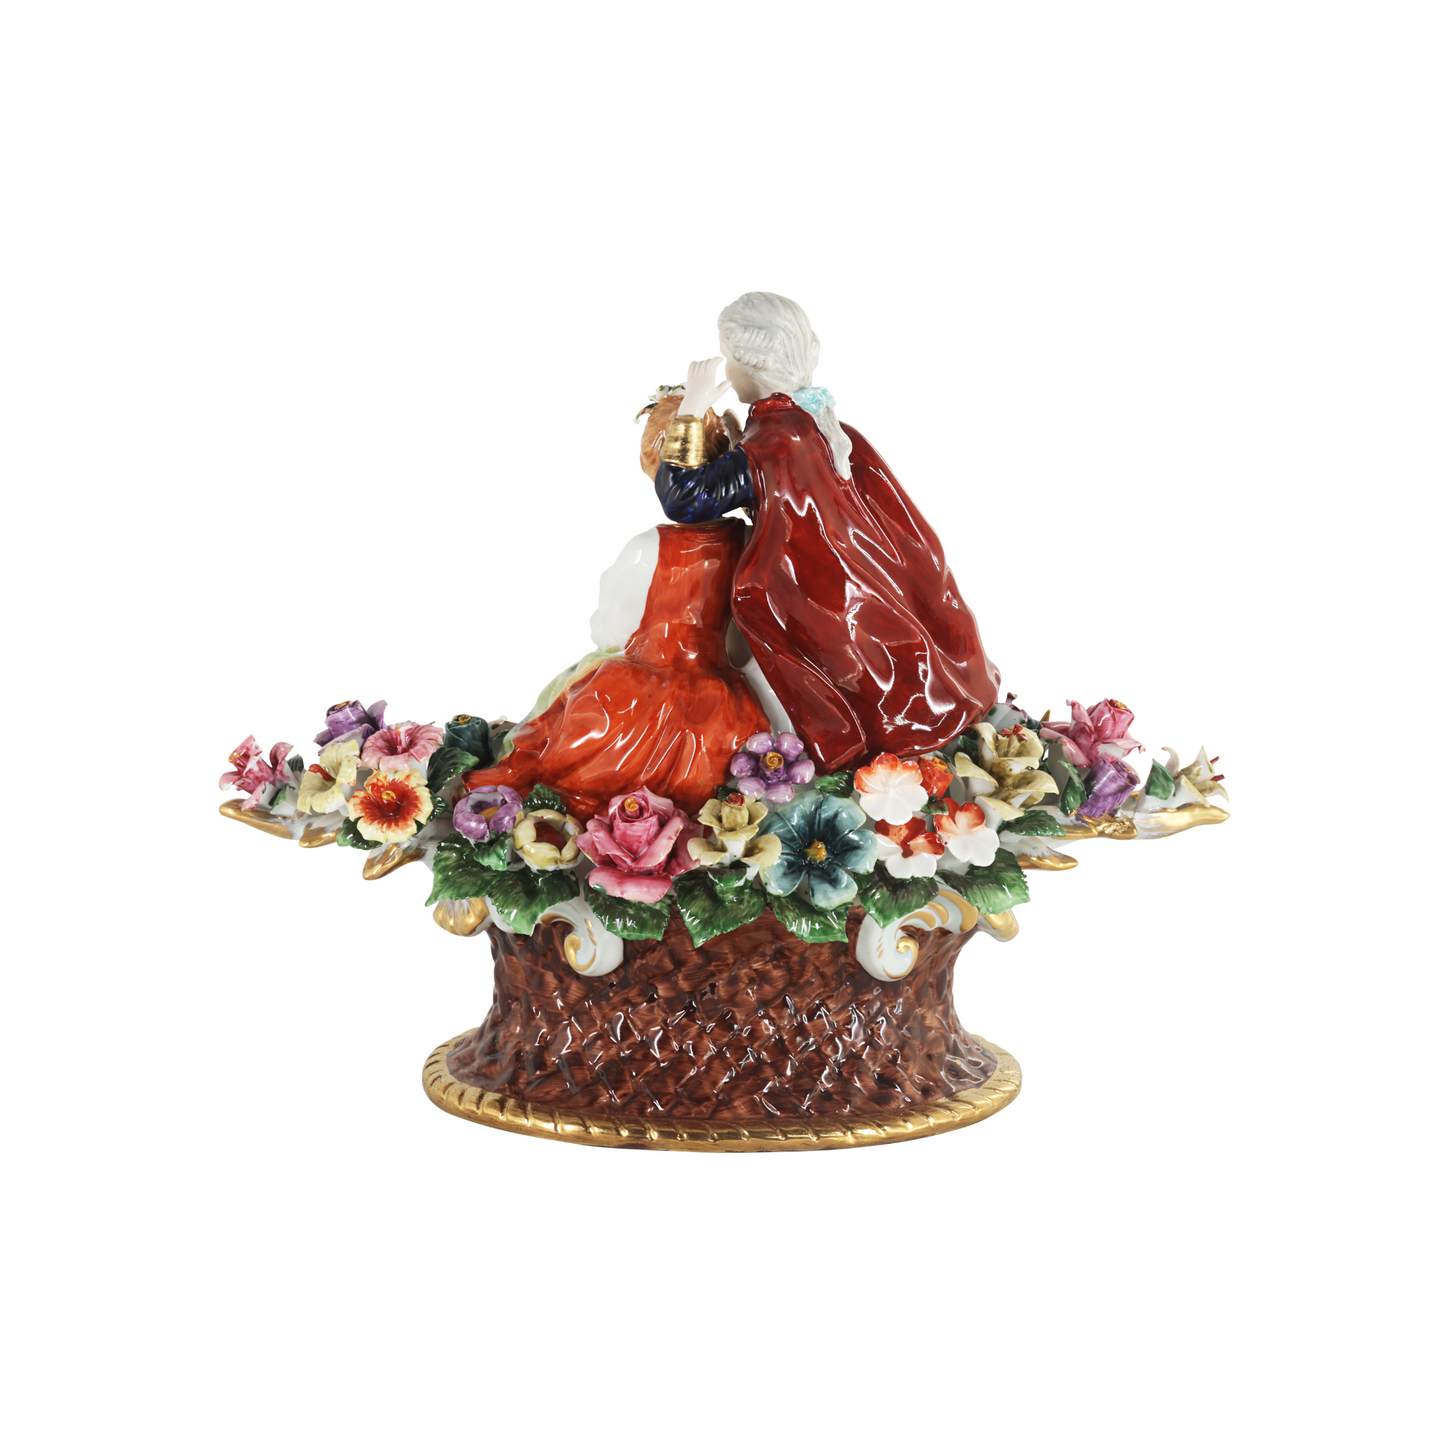 Courtship By Bed of Flowers Porcelain Figurine